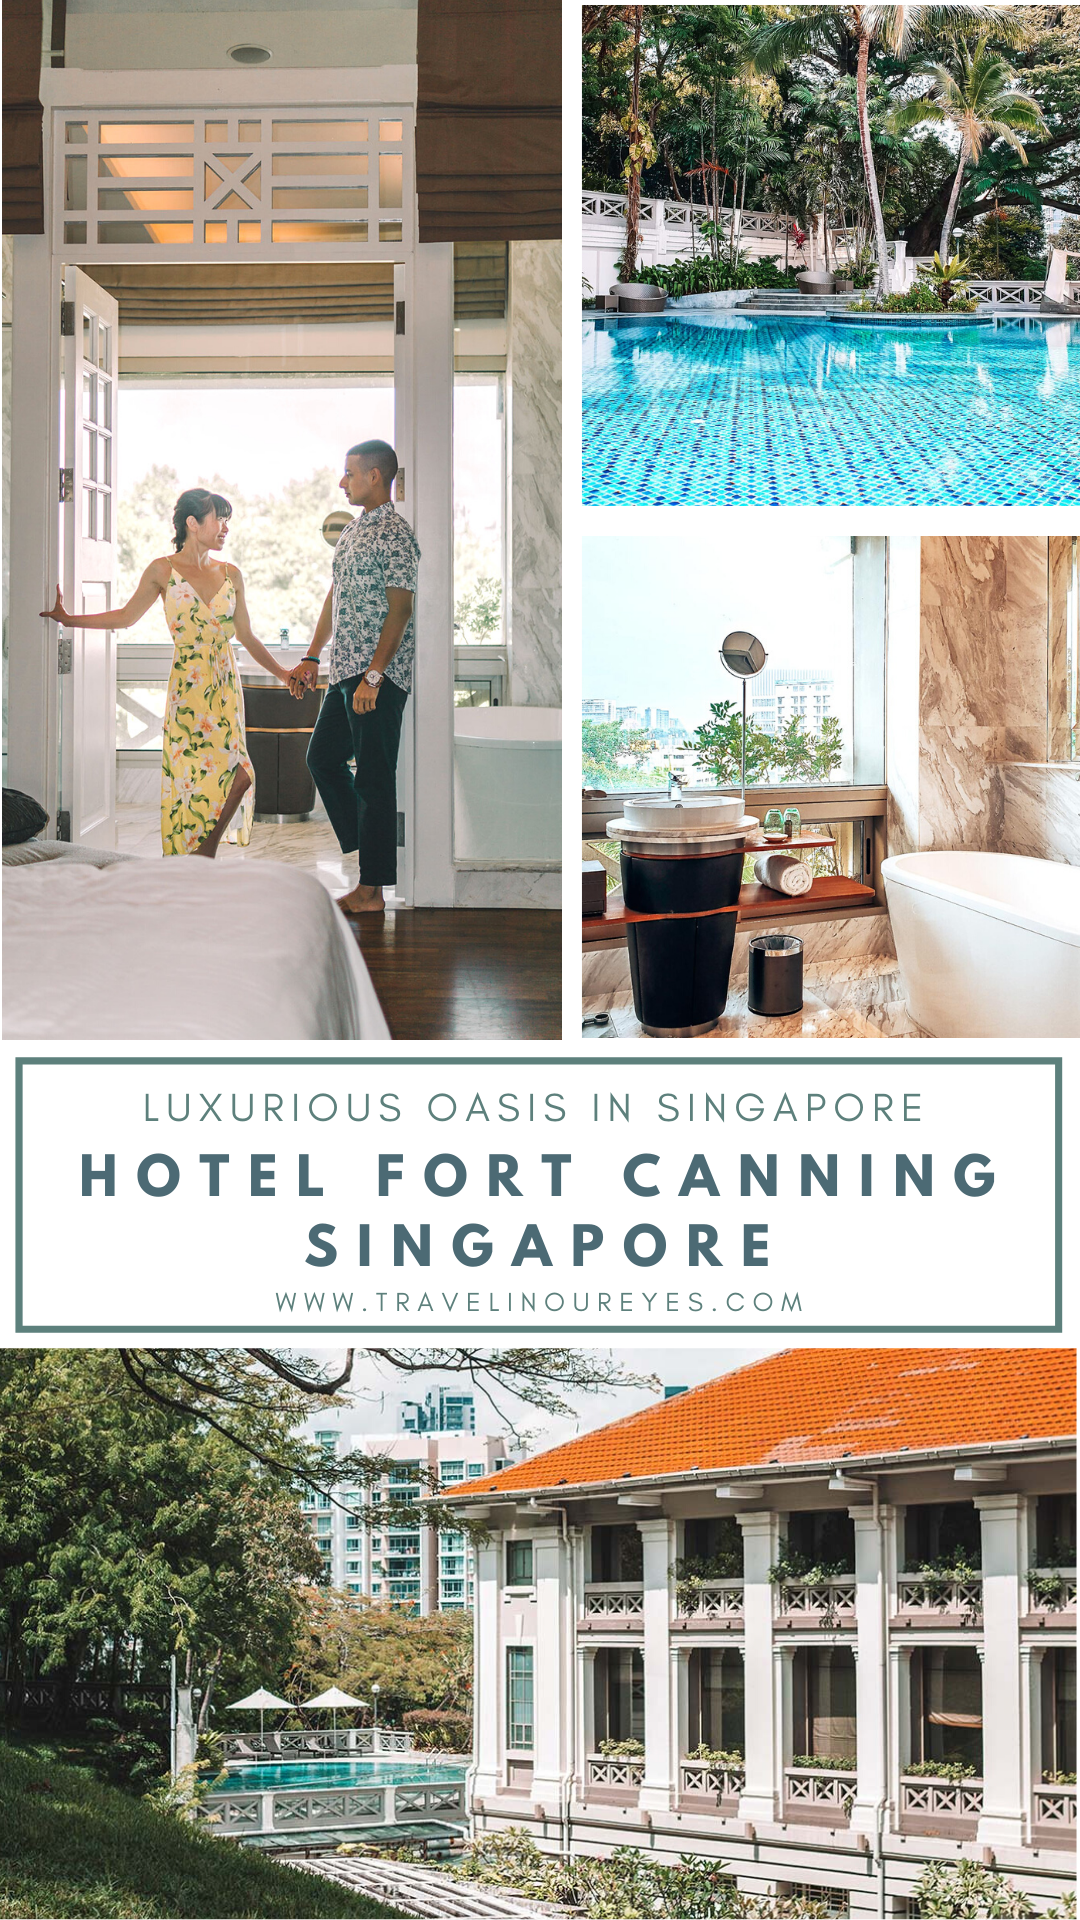 Hotel Fort Canning Luxurious Oasis In The Heart Of Singapore Travel In Our Eyes